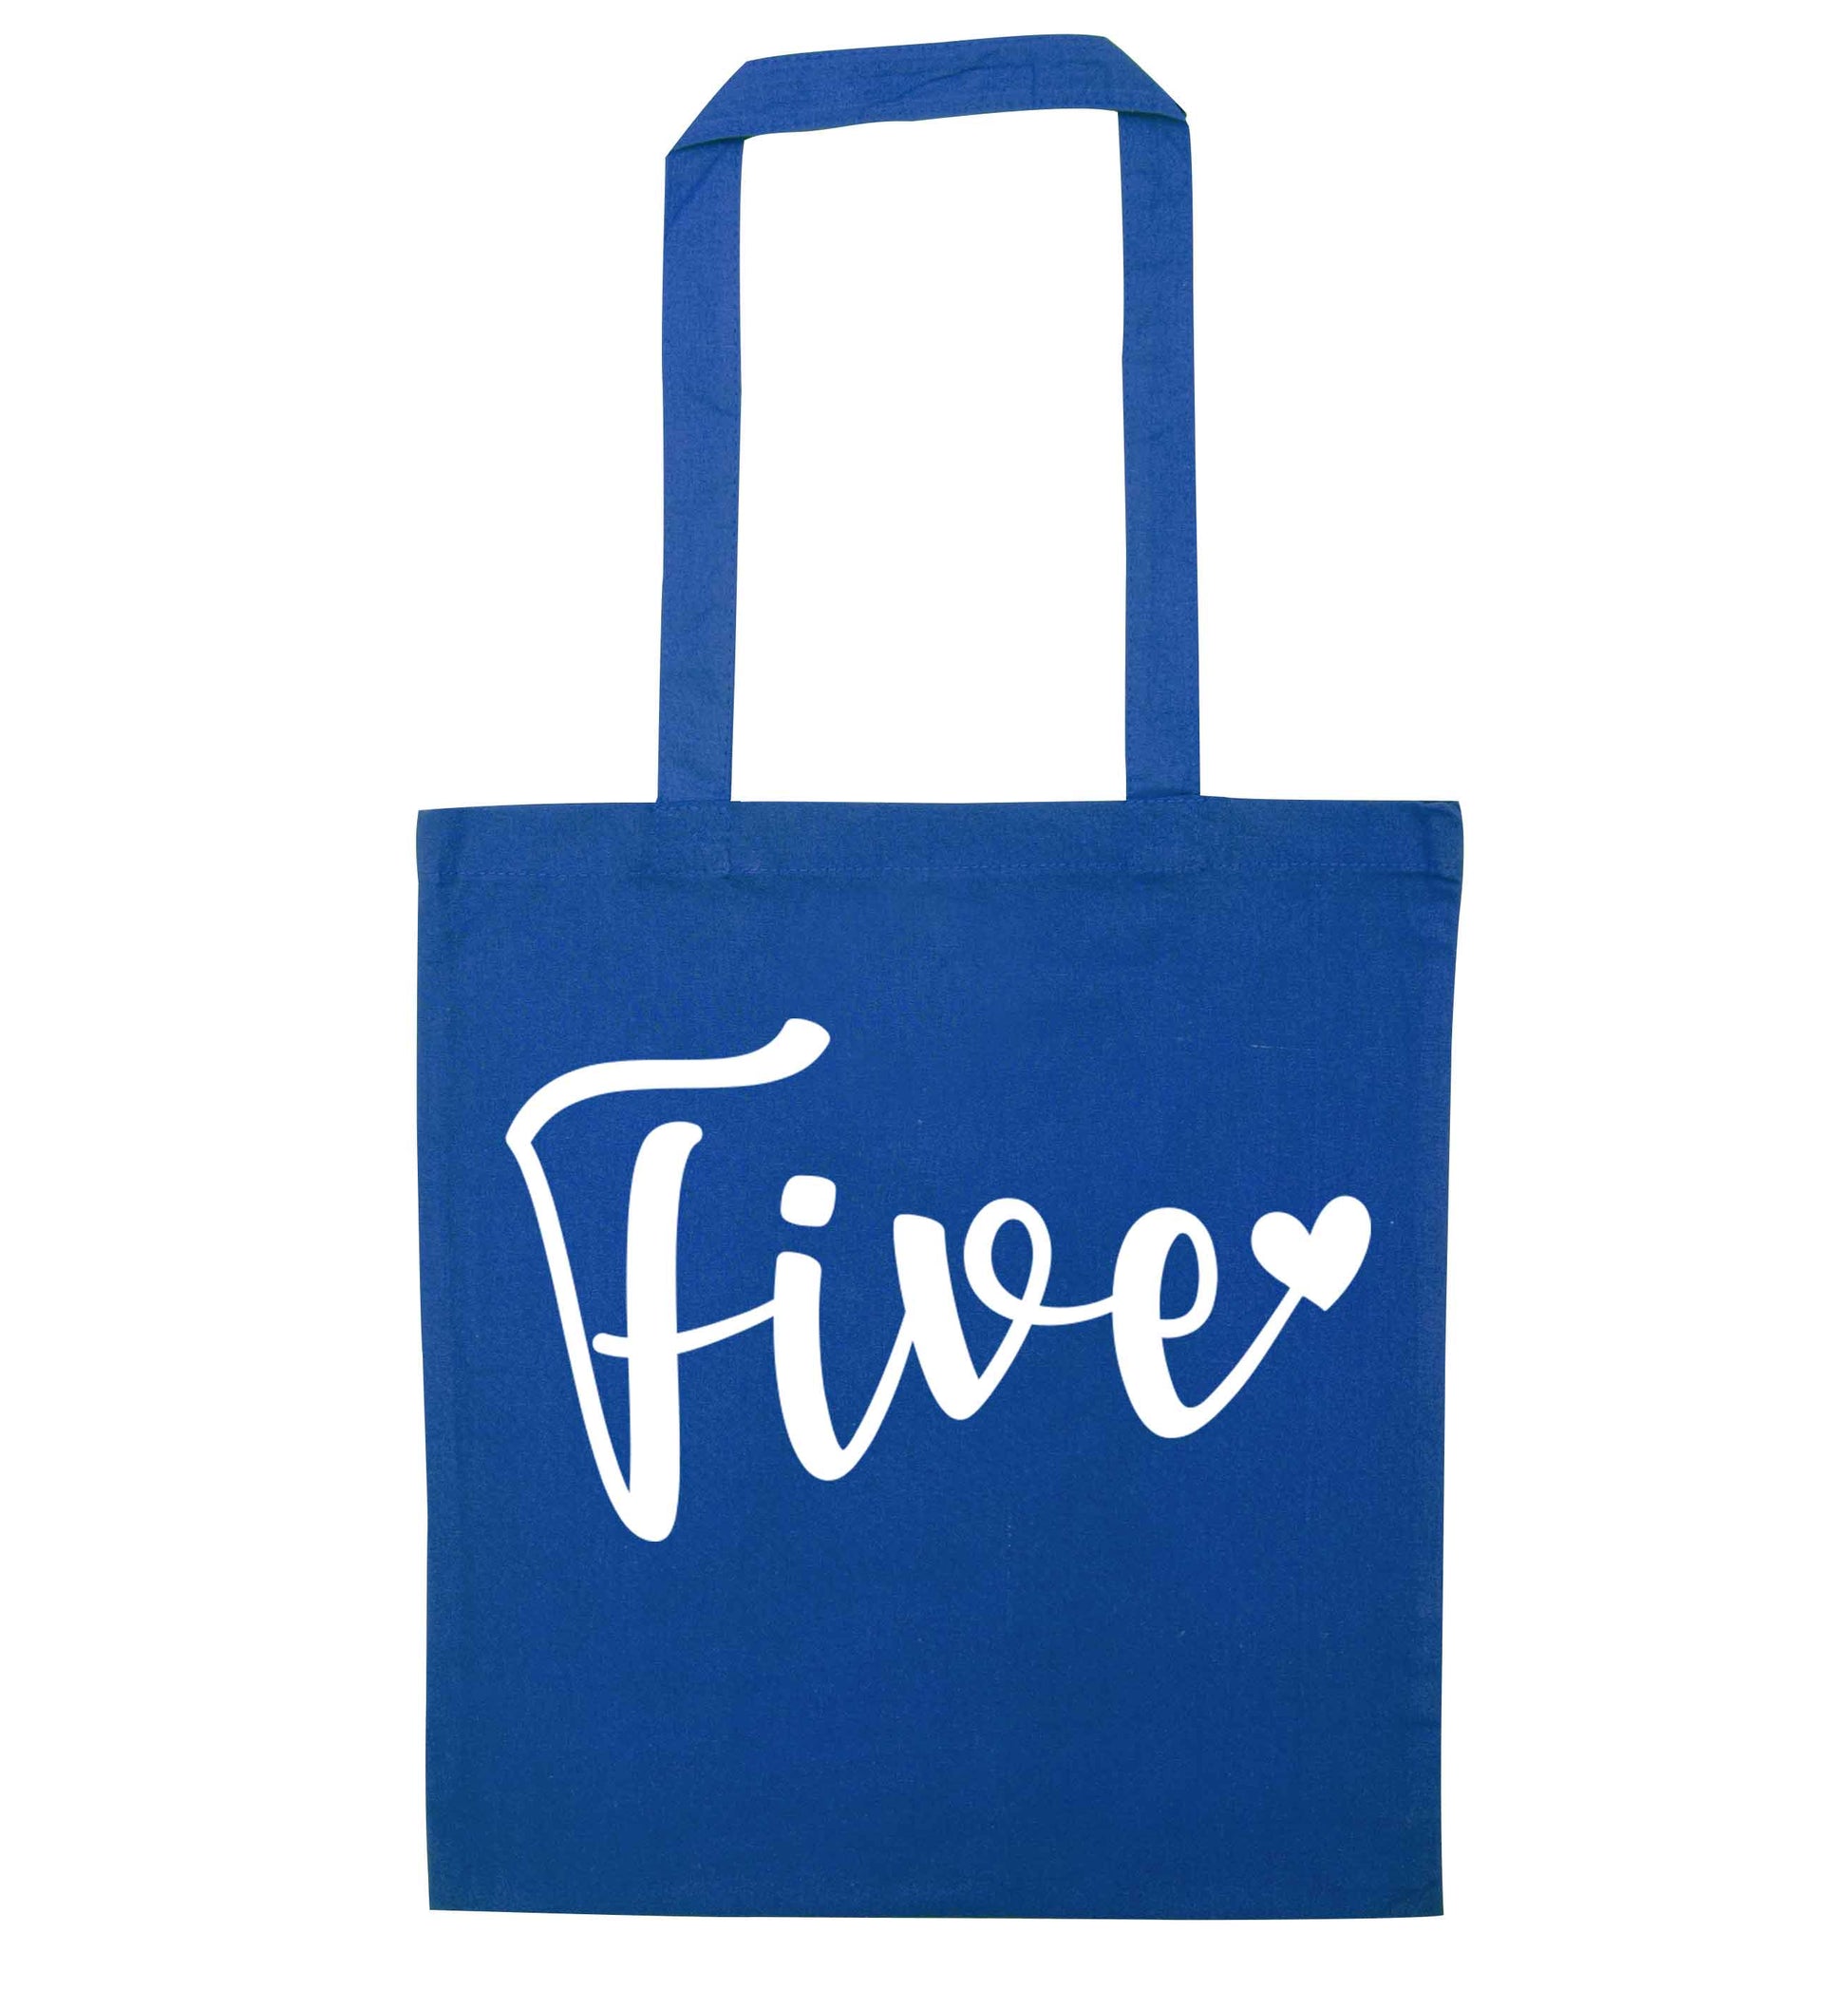 Five and heart blue tote bag